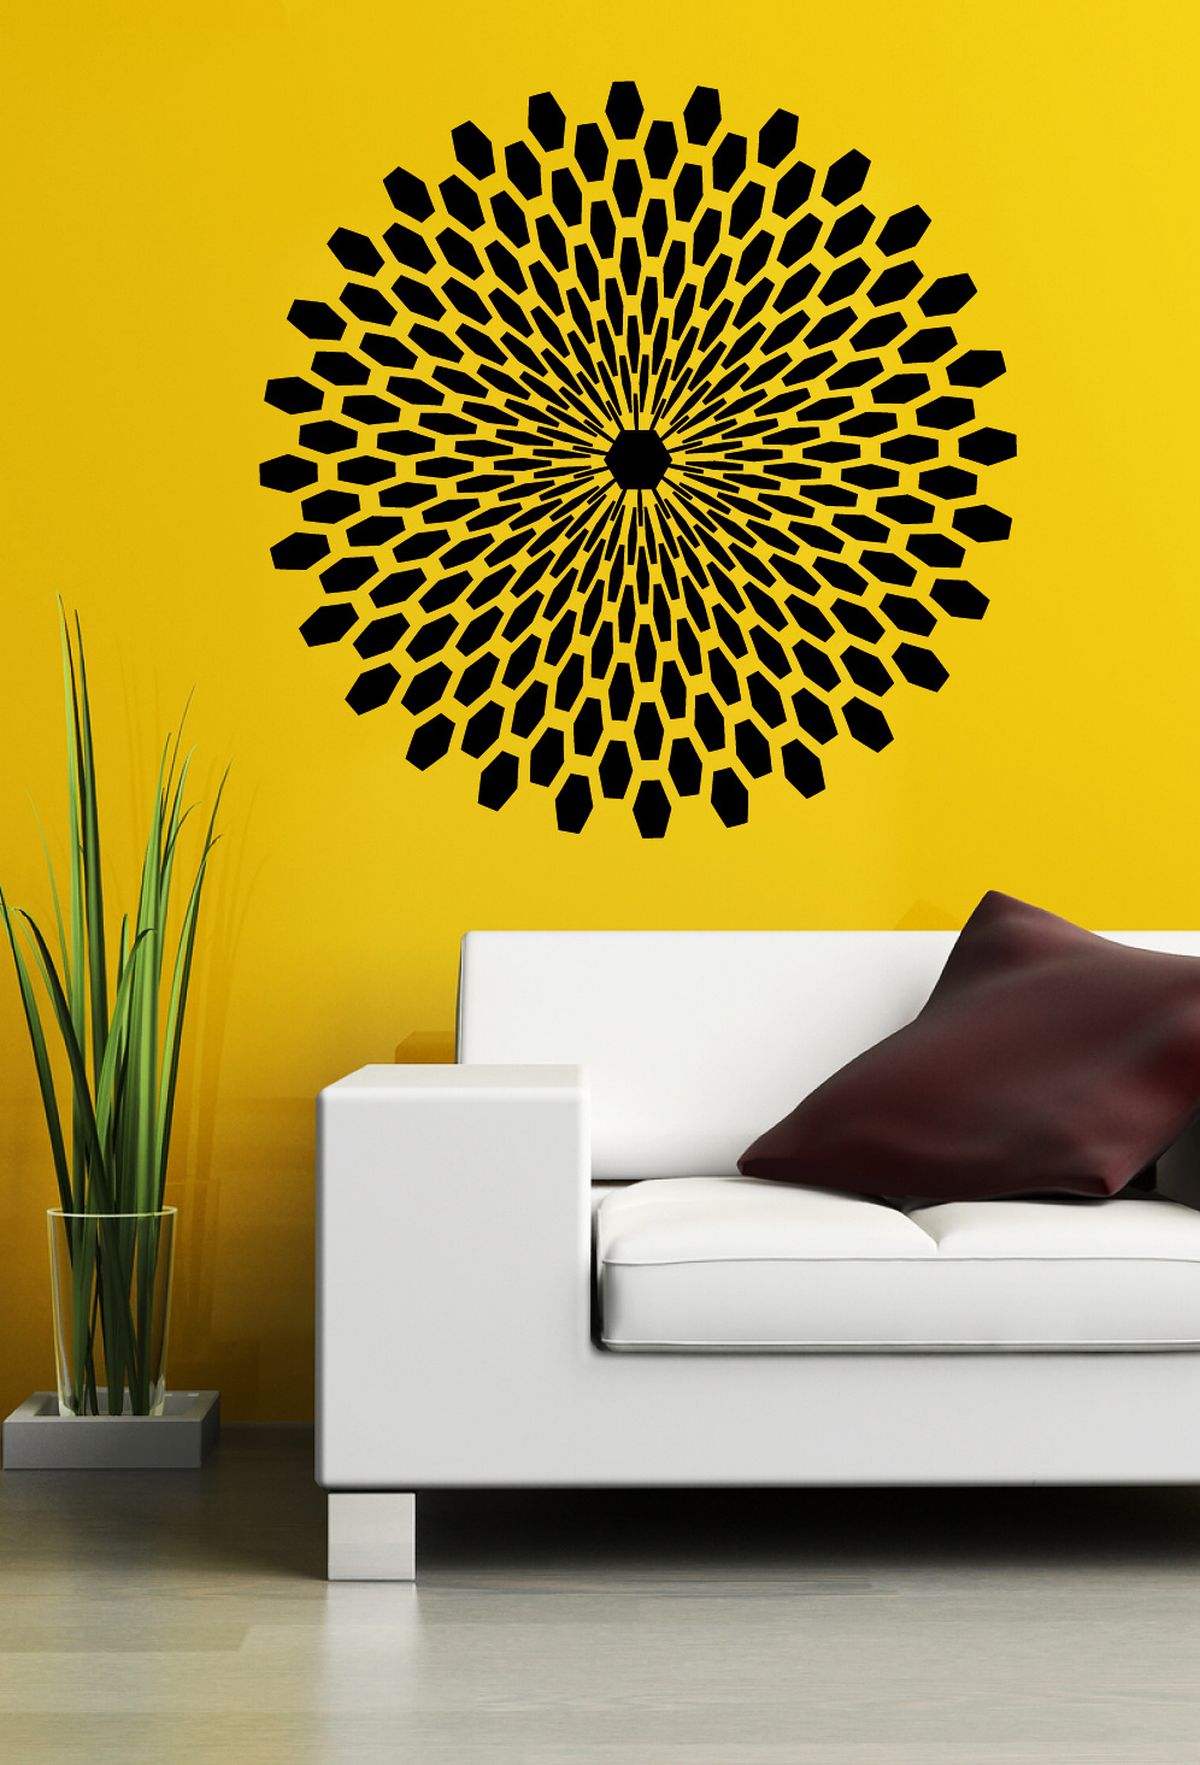 A 3-D wall decal, easily installed, stands out on a wall in a drawing room.